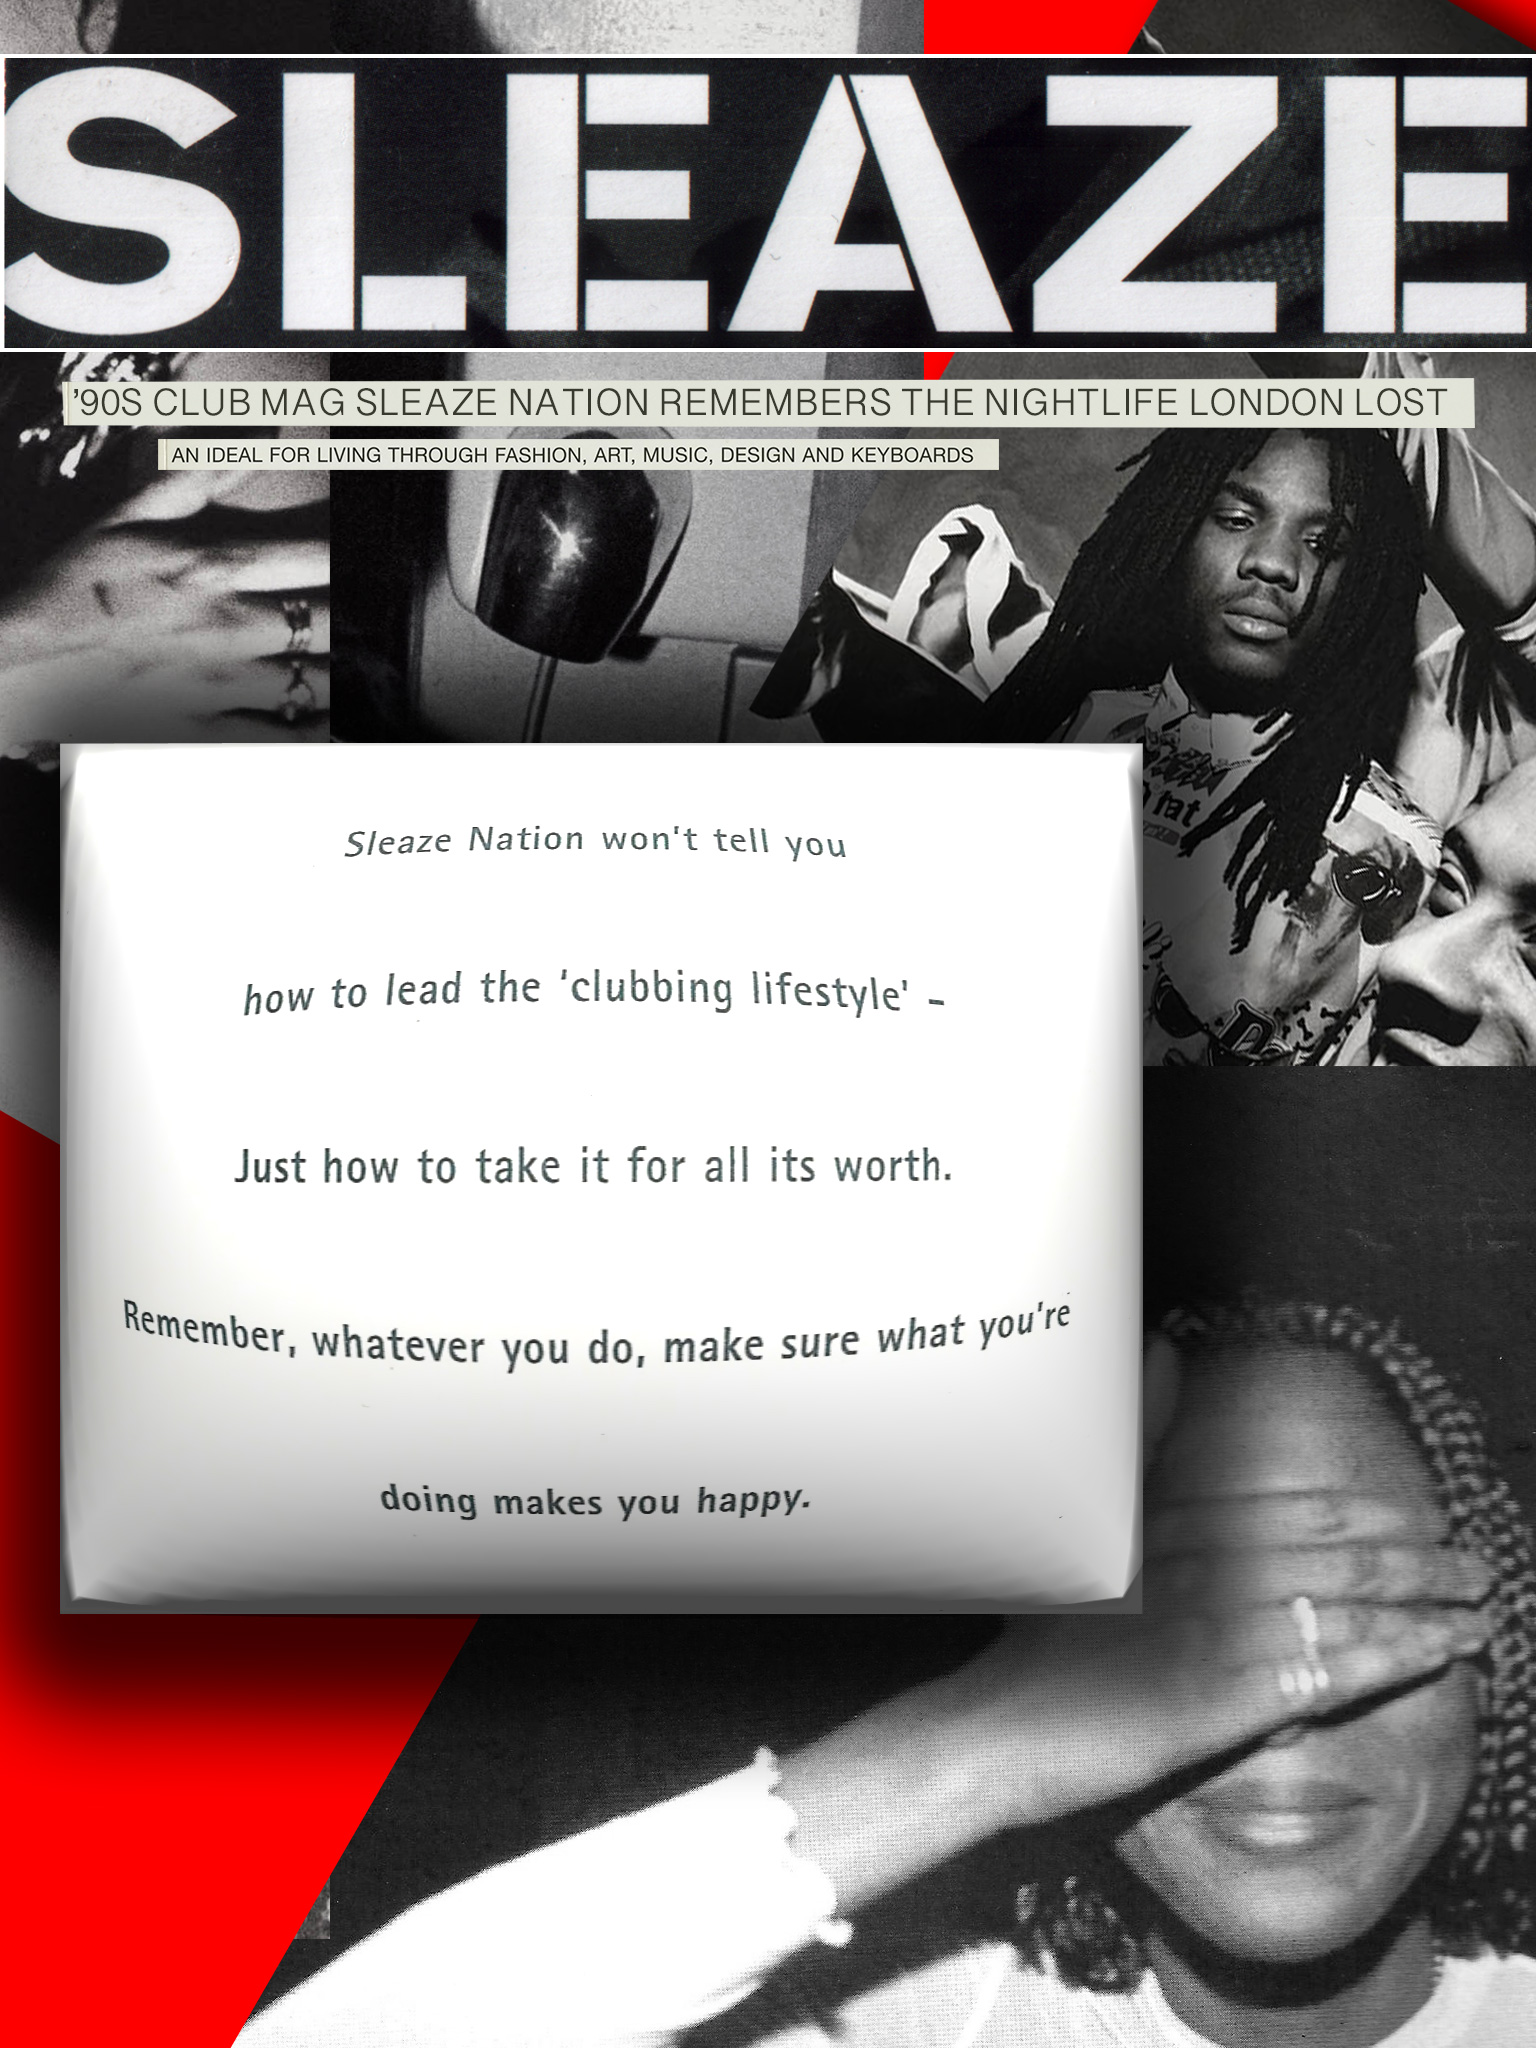 '90s Club Mag Sleaze Nation Remembers the Nightlife London Lost